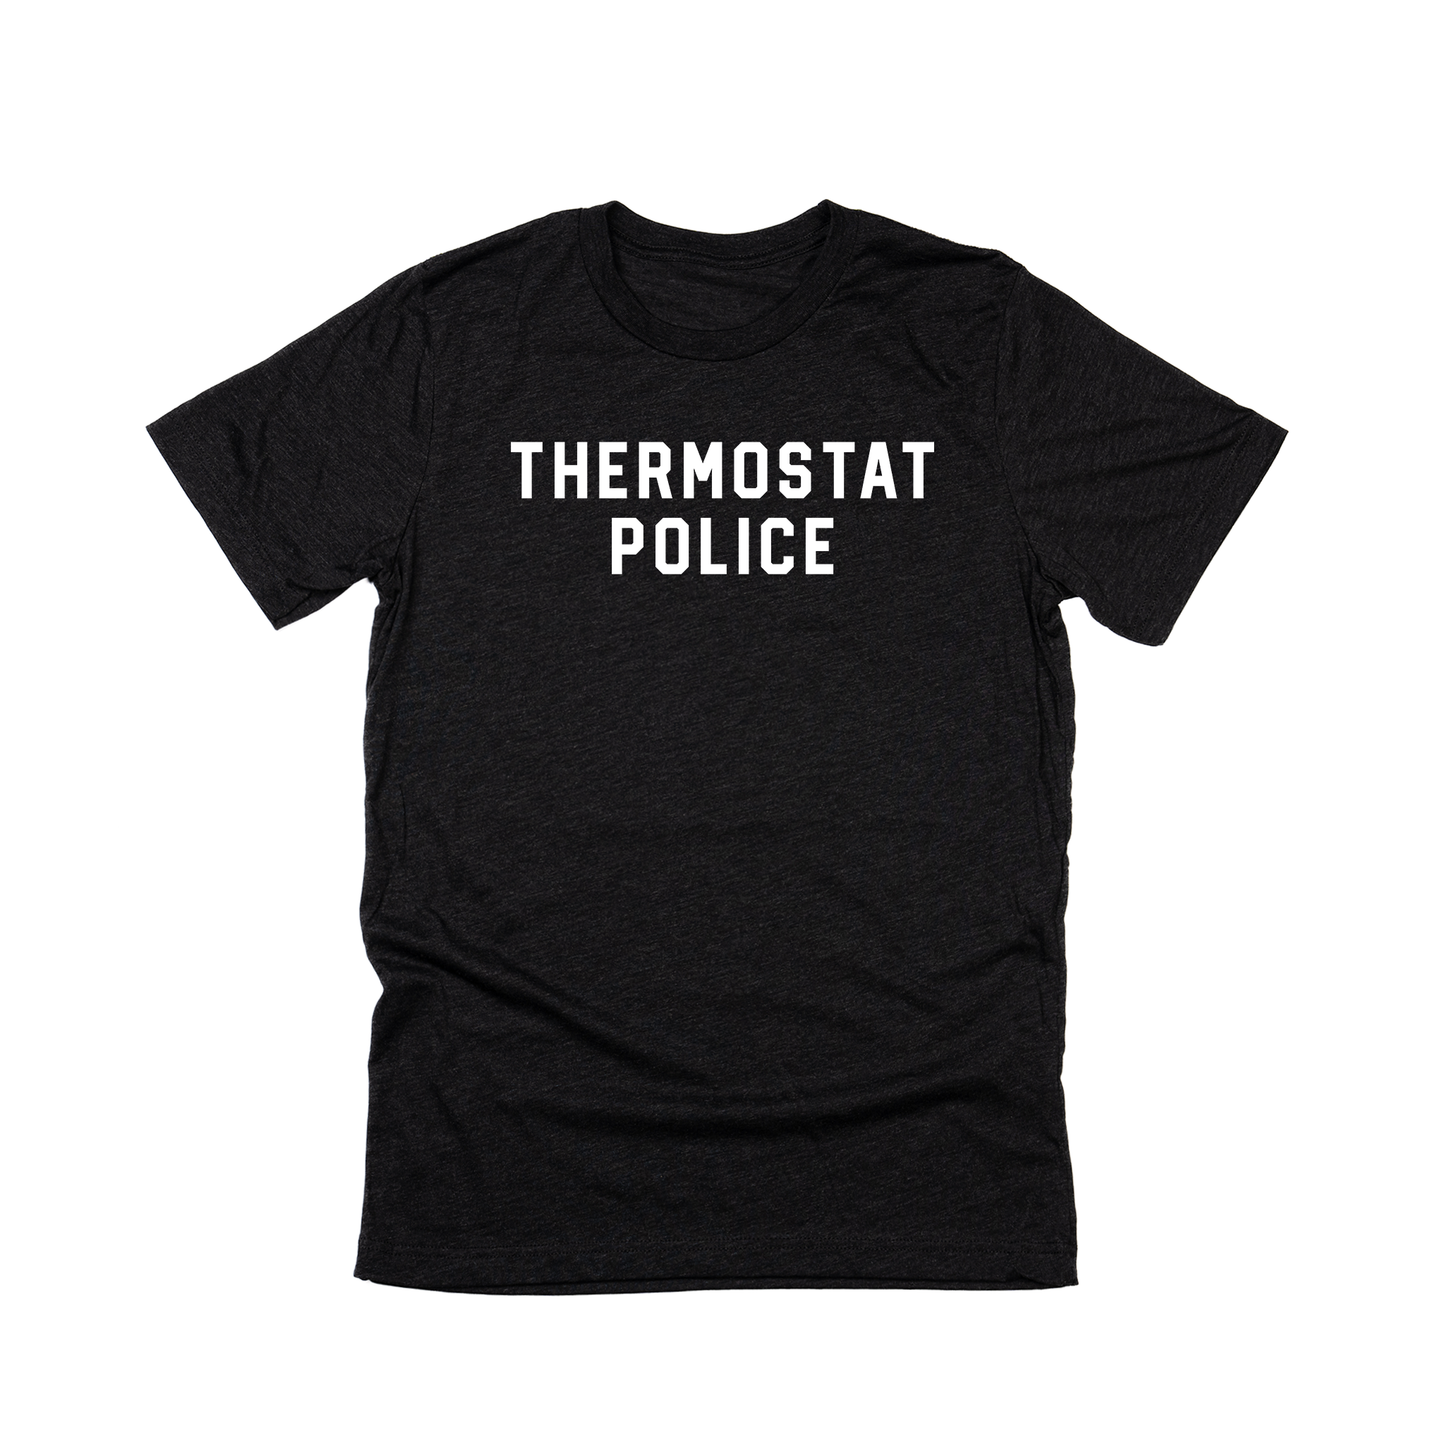 Thermostat Police (White) - Tee (Charcoal Black)